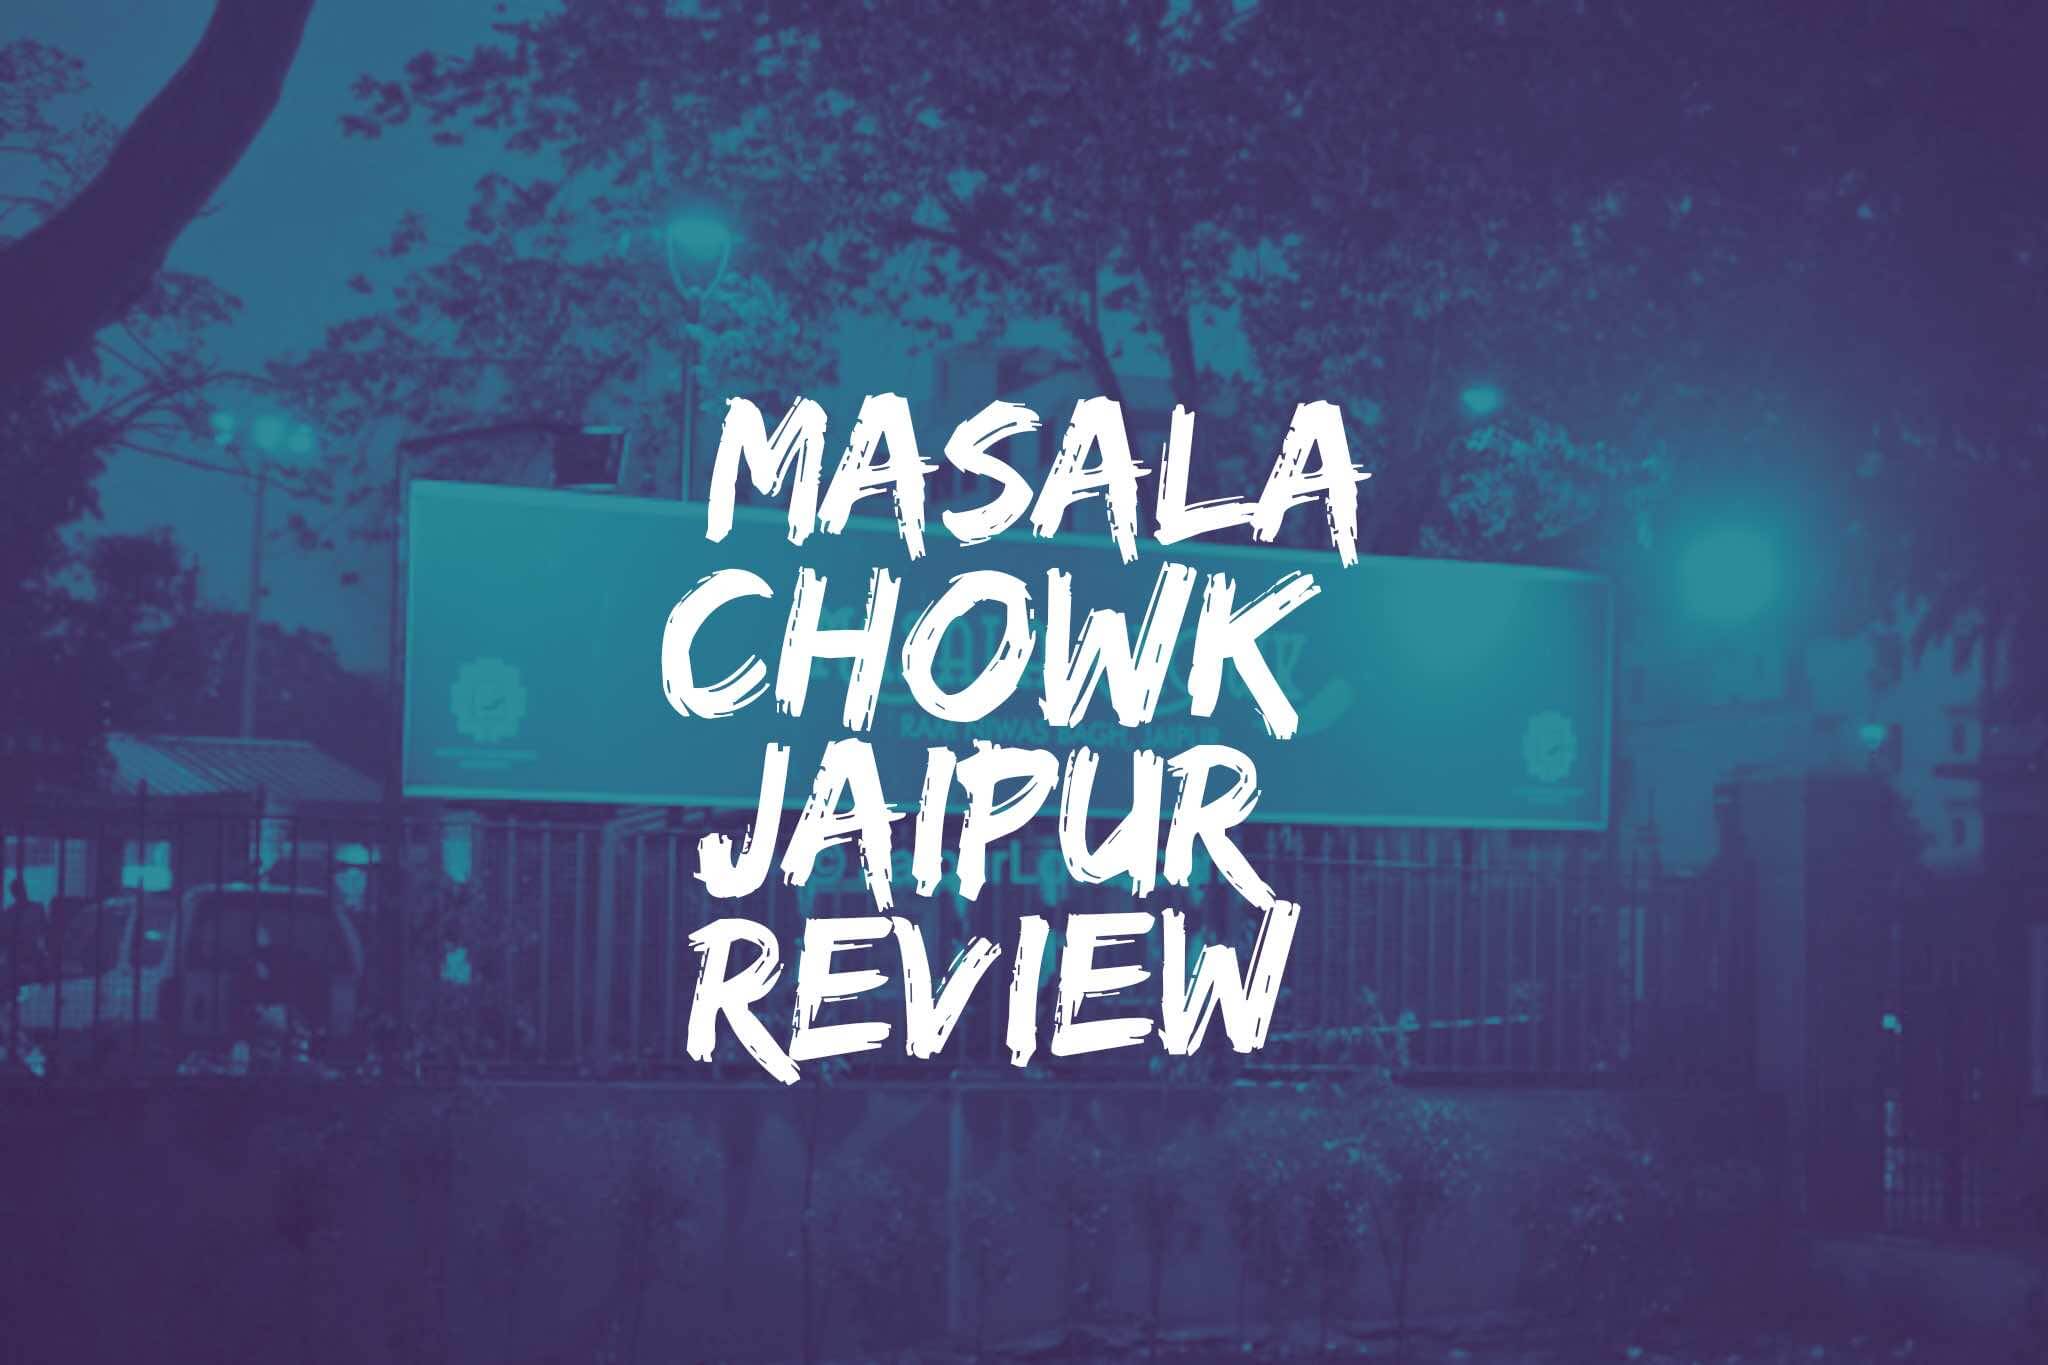 Masala Chowk Jaipur Review – List of Shops with Menu, Timing & Parking details